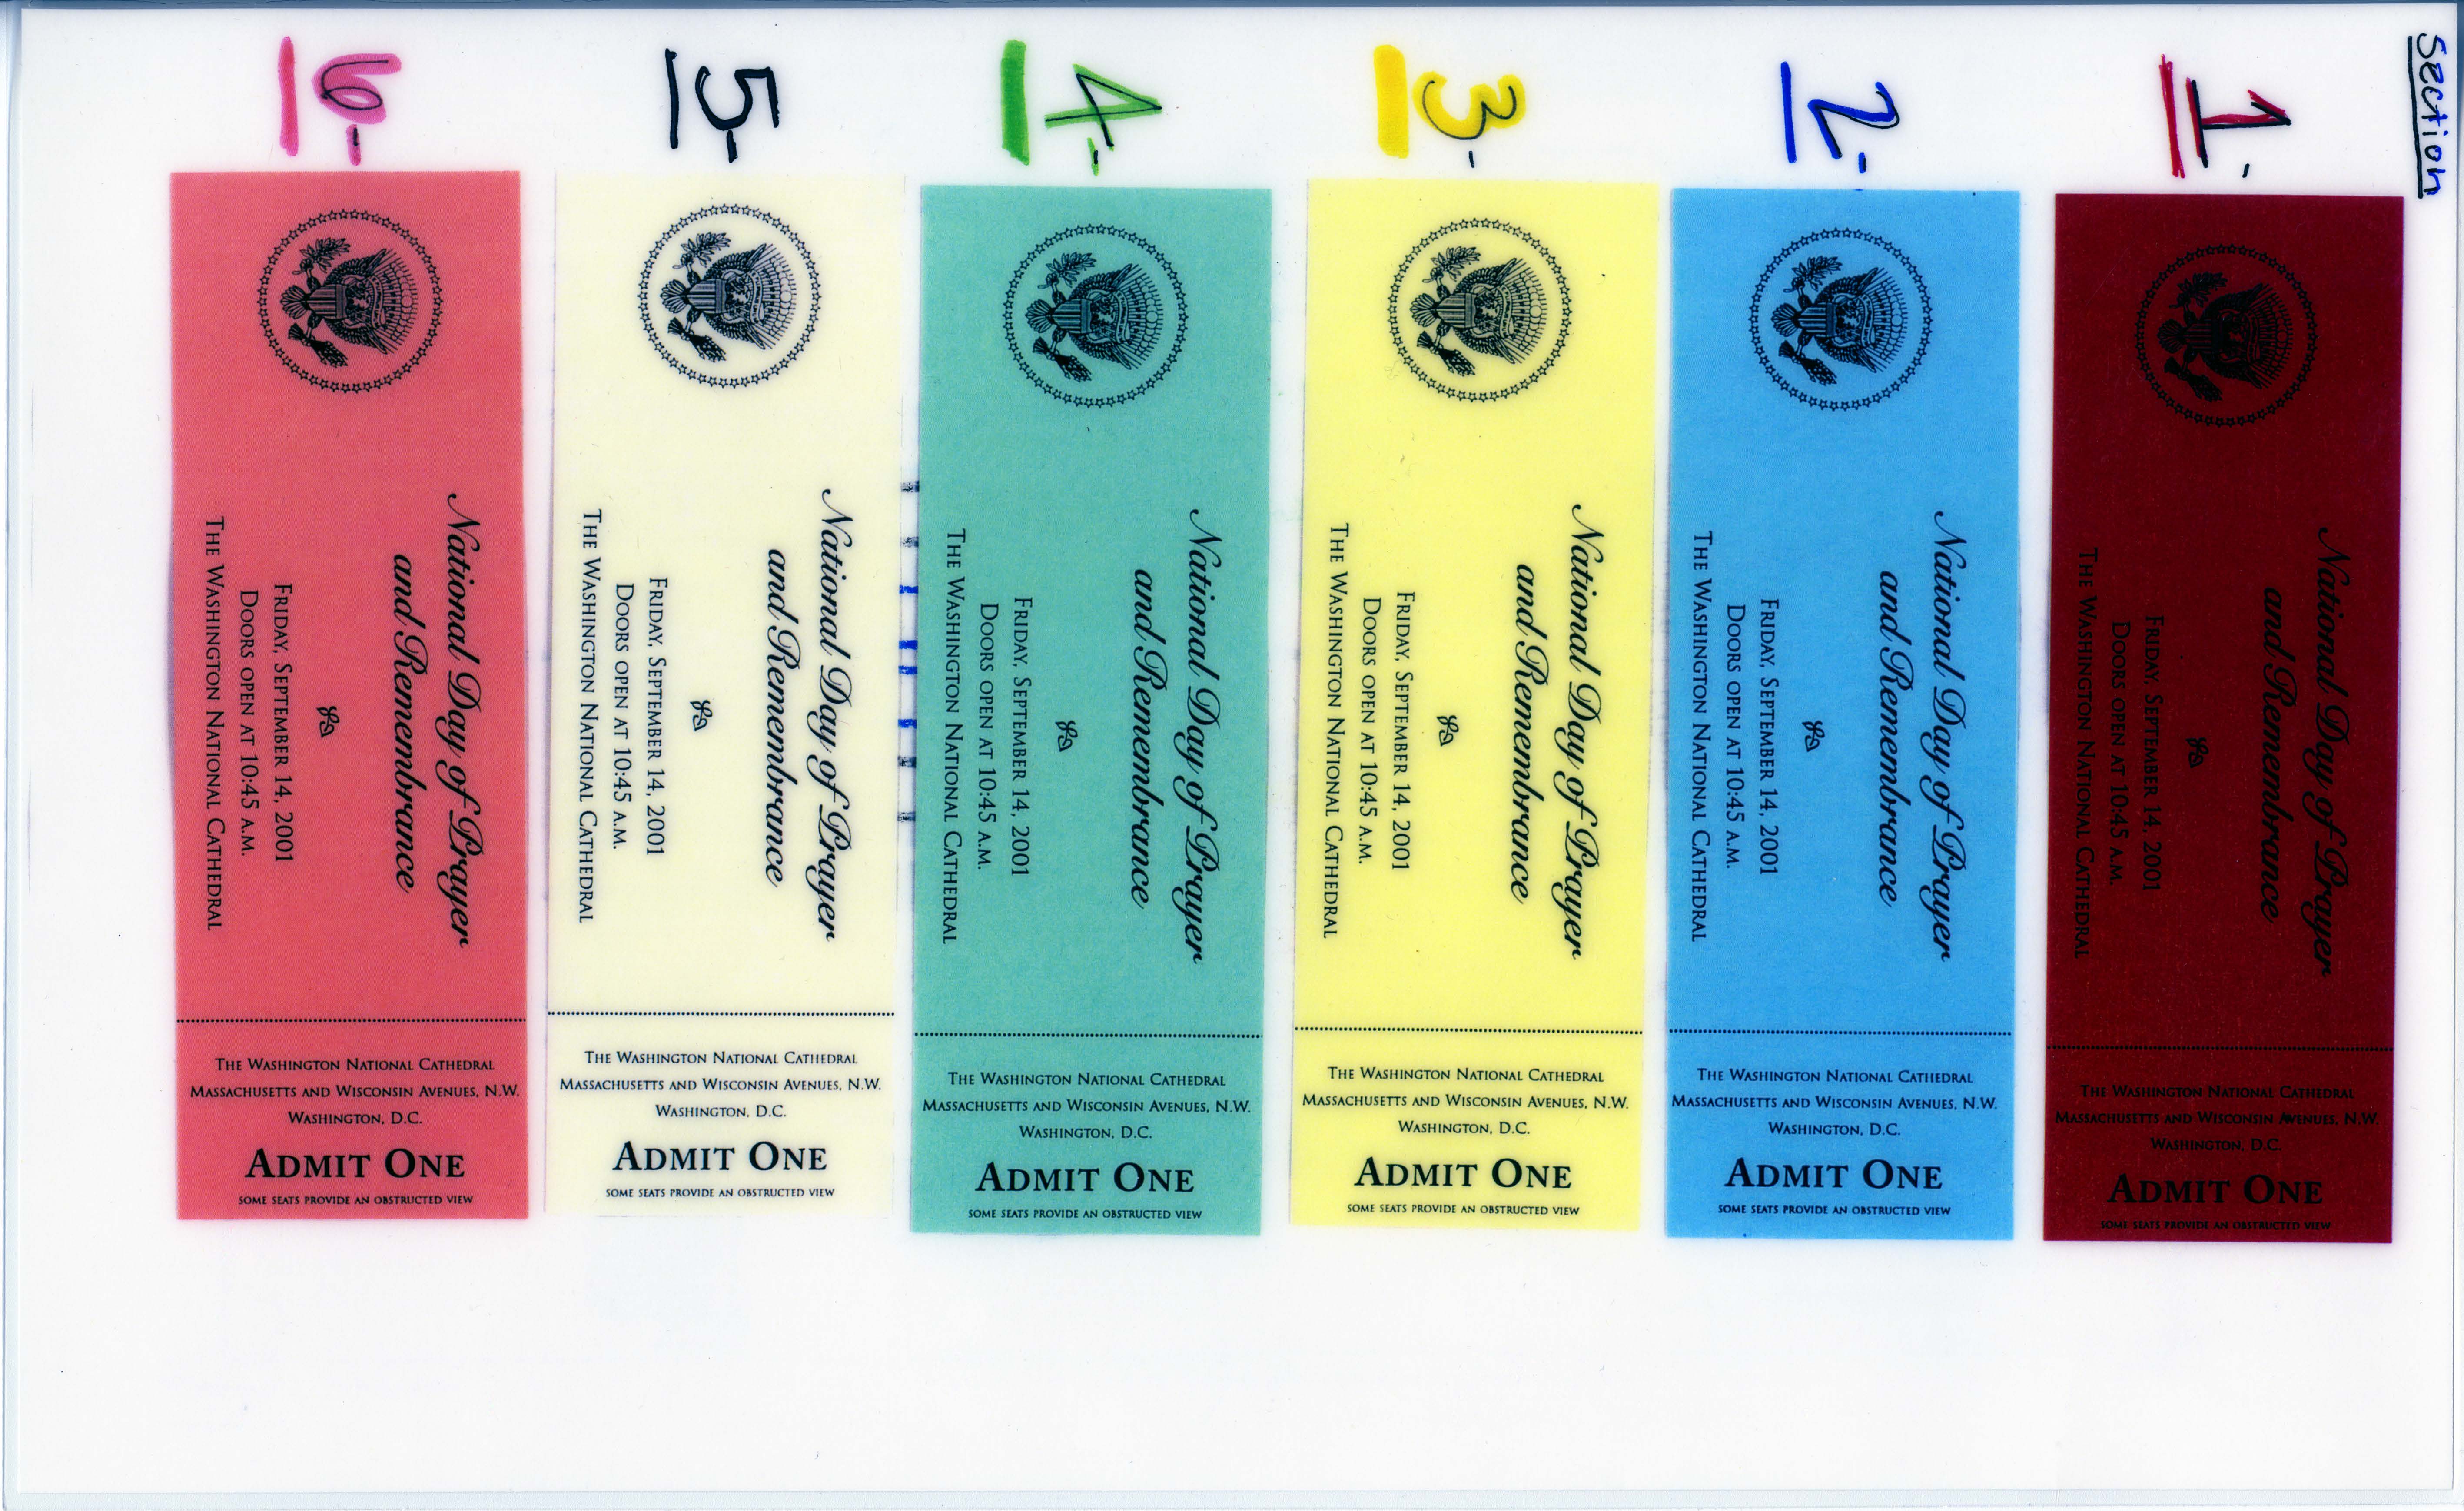 Seating chart and tickets from the National Day of Prayer and Remembrance service held at the Washington National Cathedral on September 14, 2001. (Page 2 of 2)